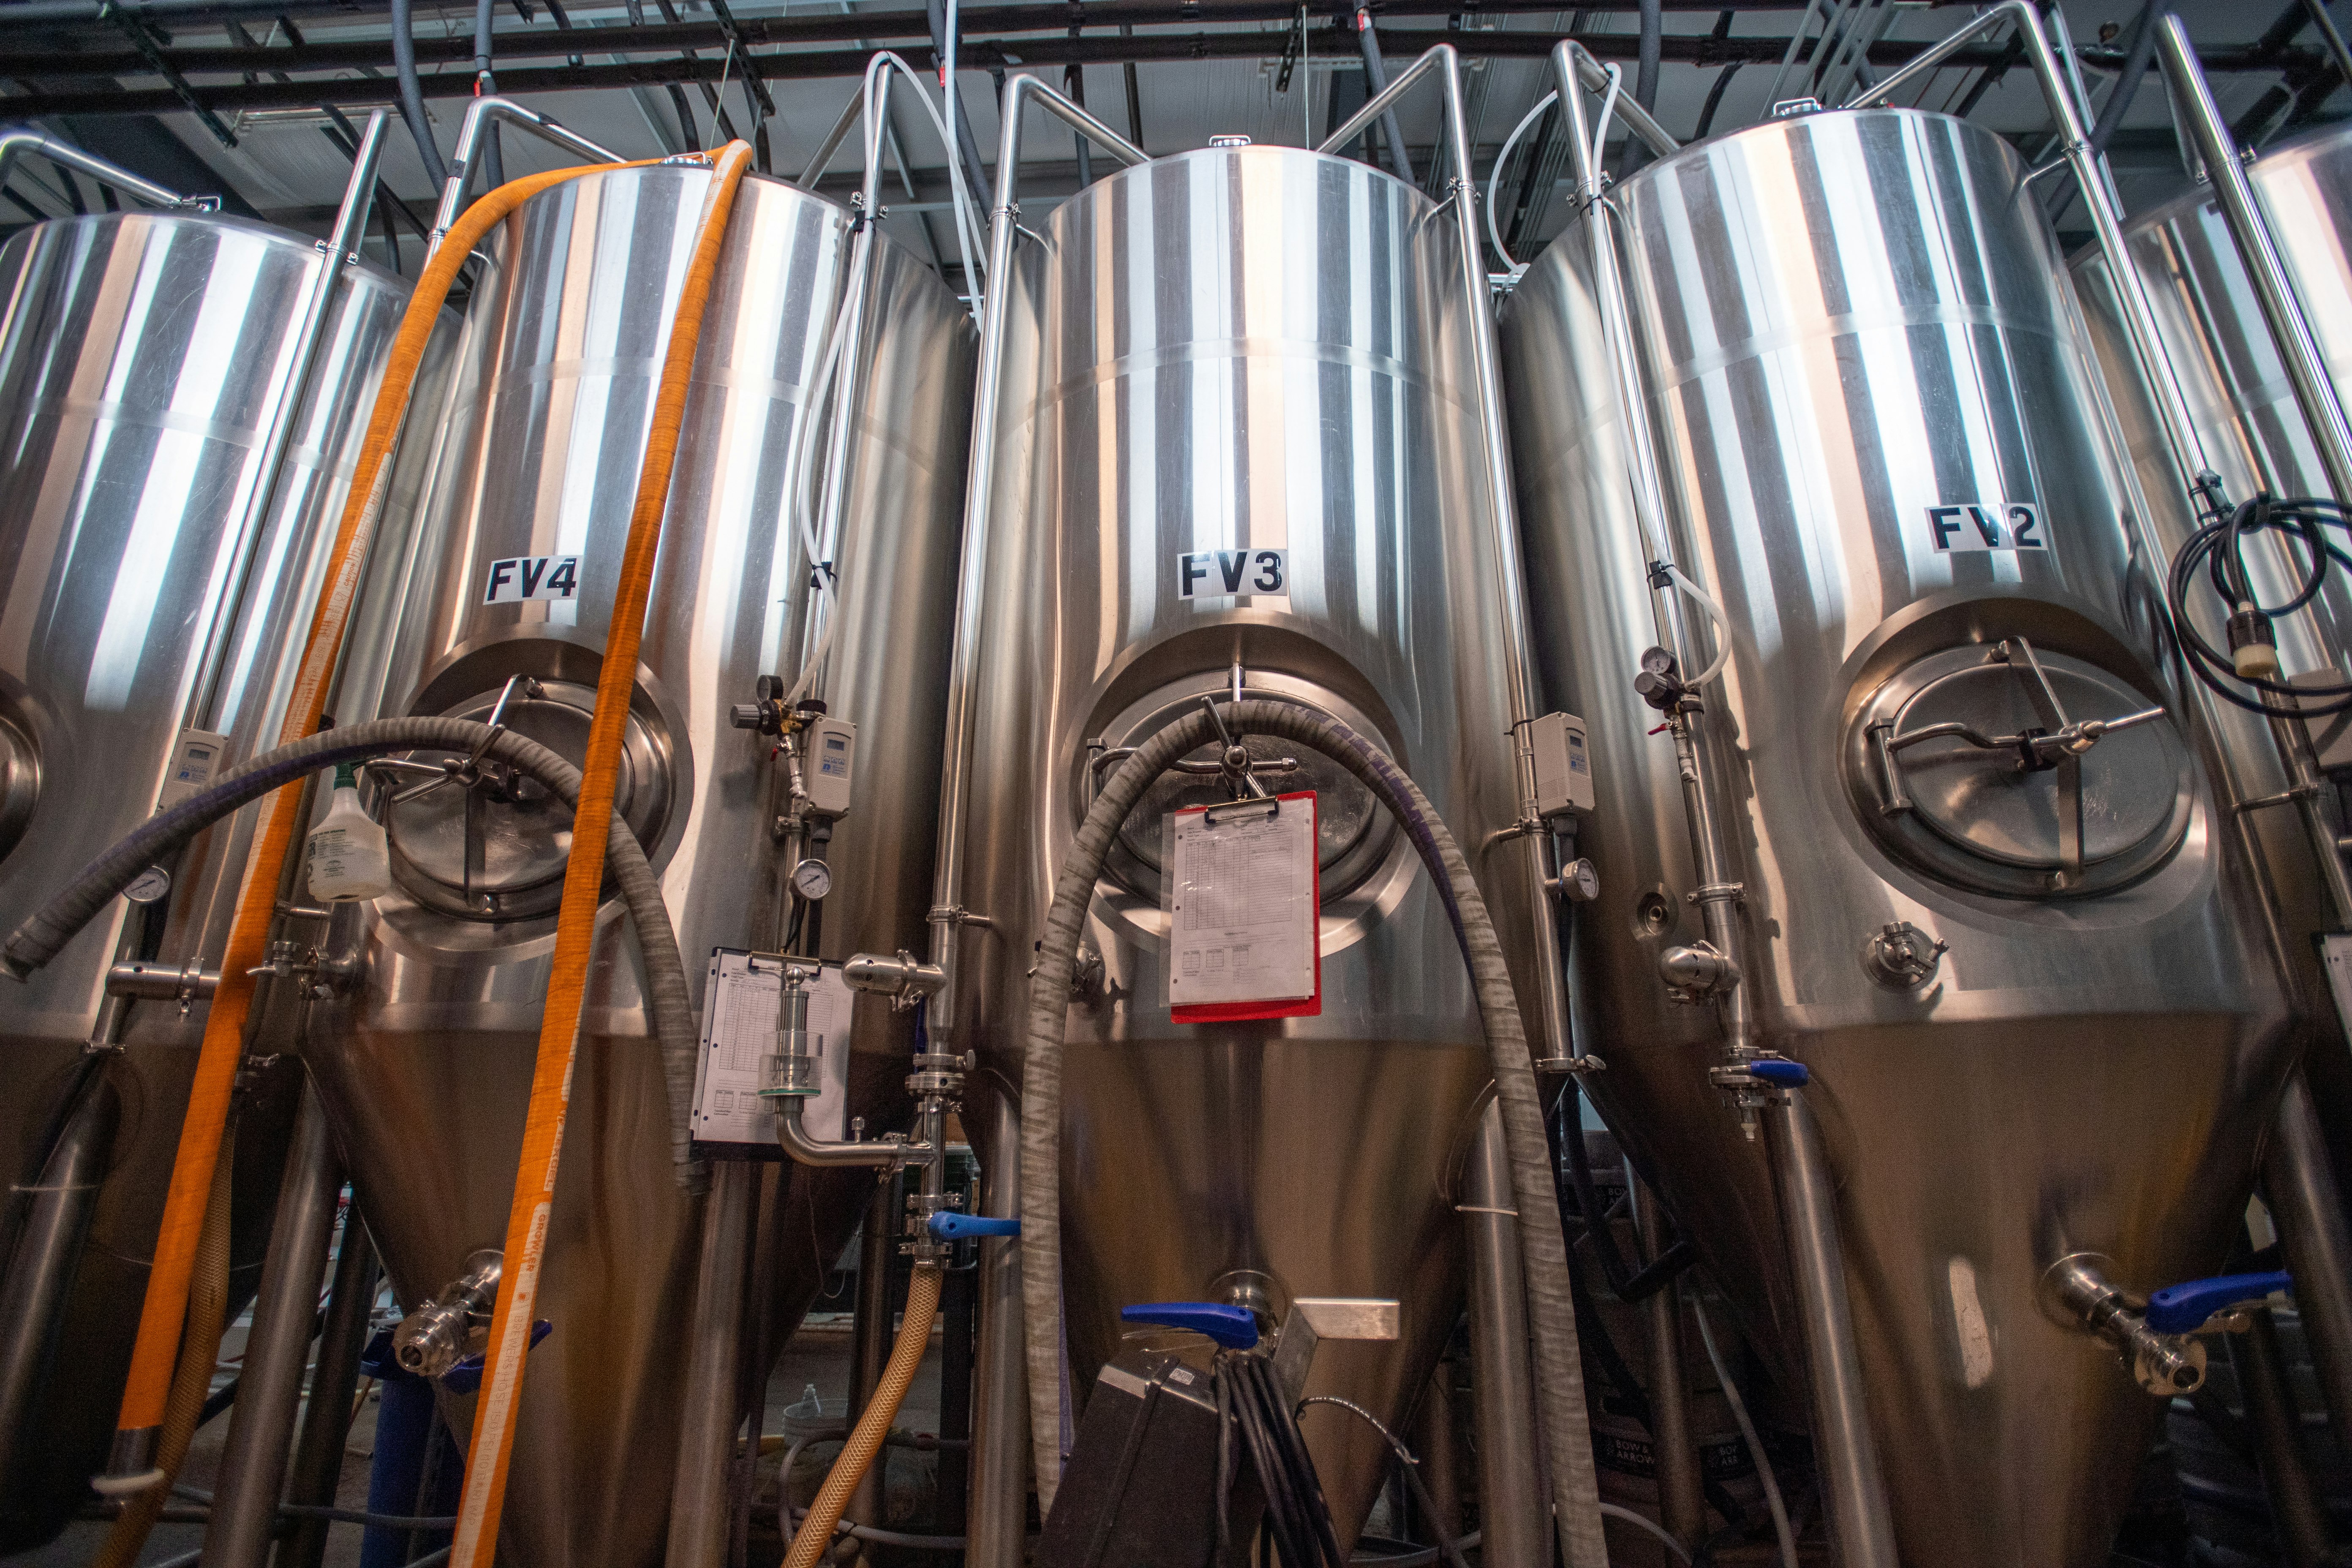 An interior view shows the vast brewing vats at the Bow and Arrow Brewing Co. in Albuquerque, New Mexico